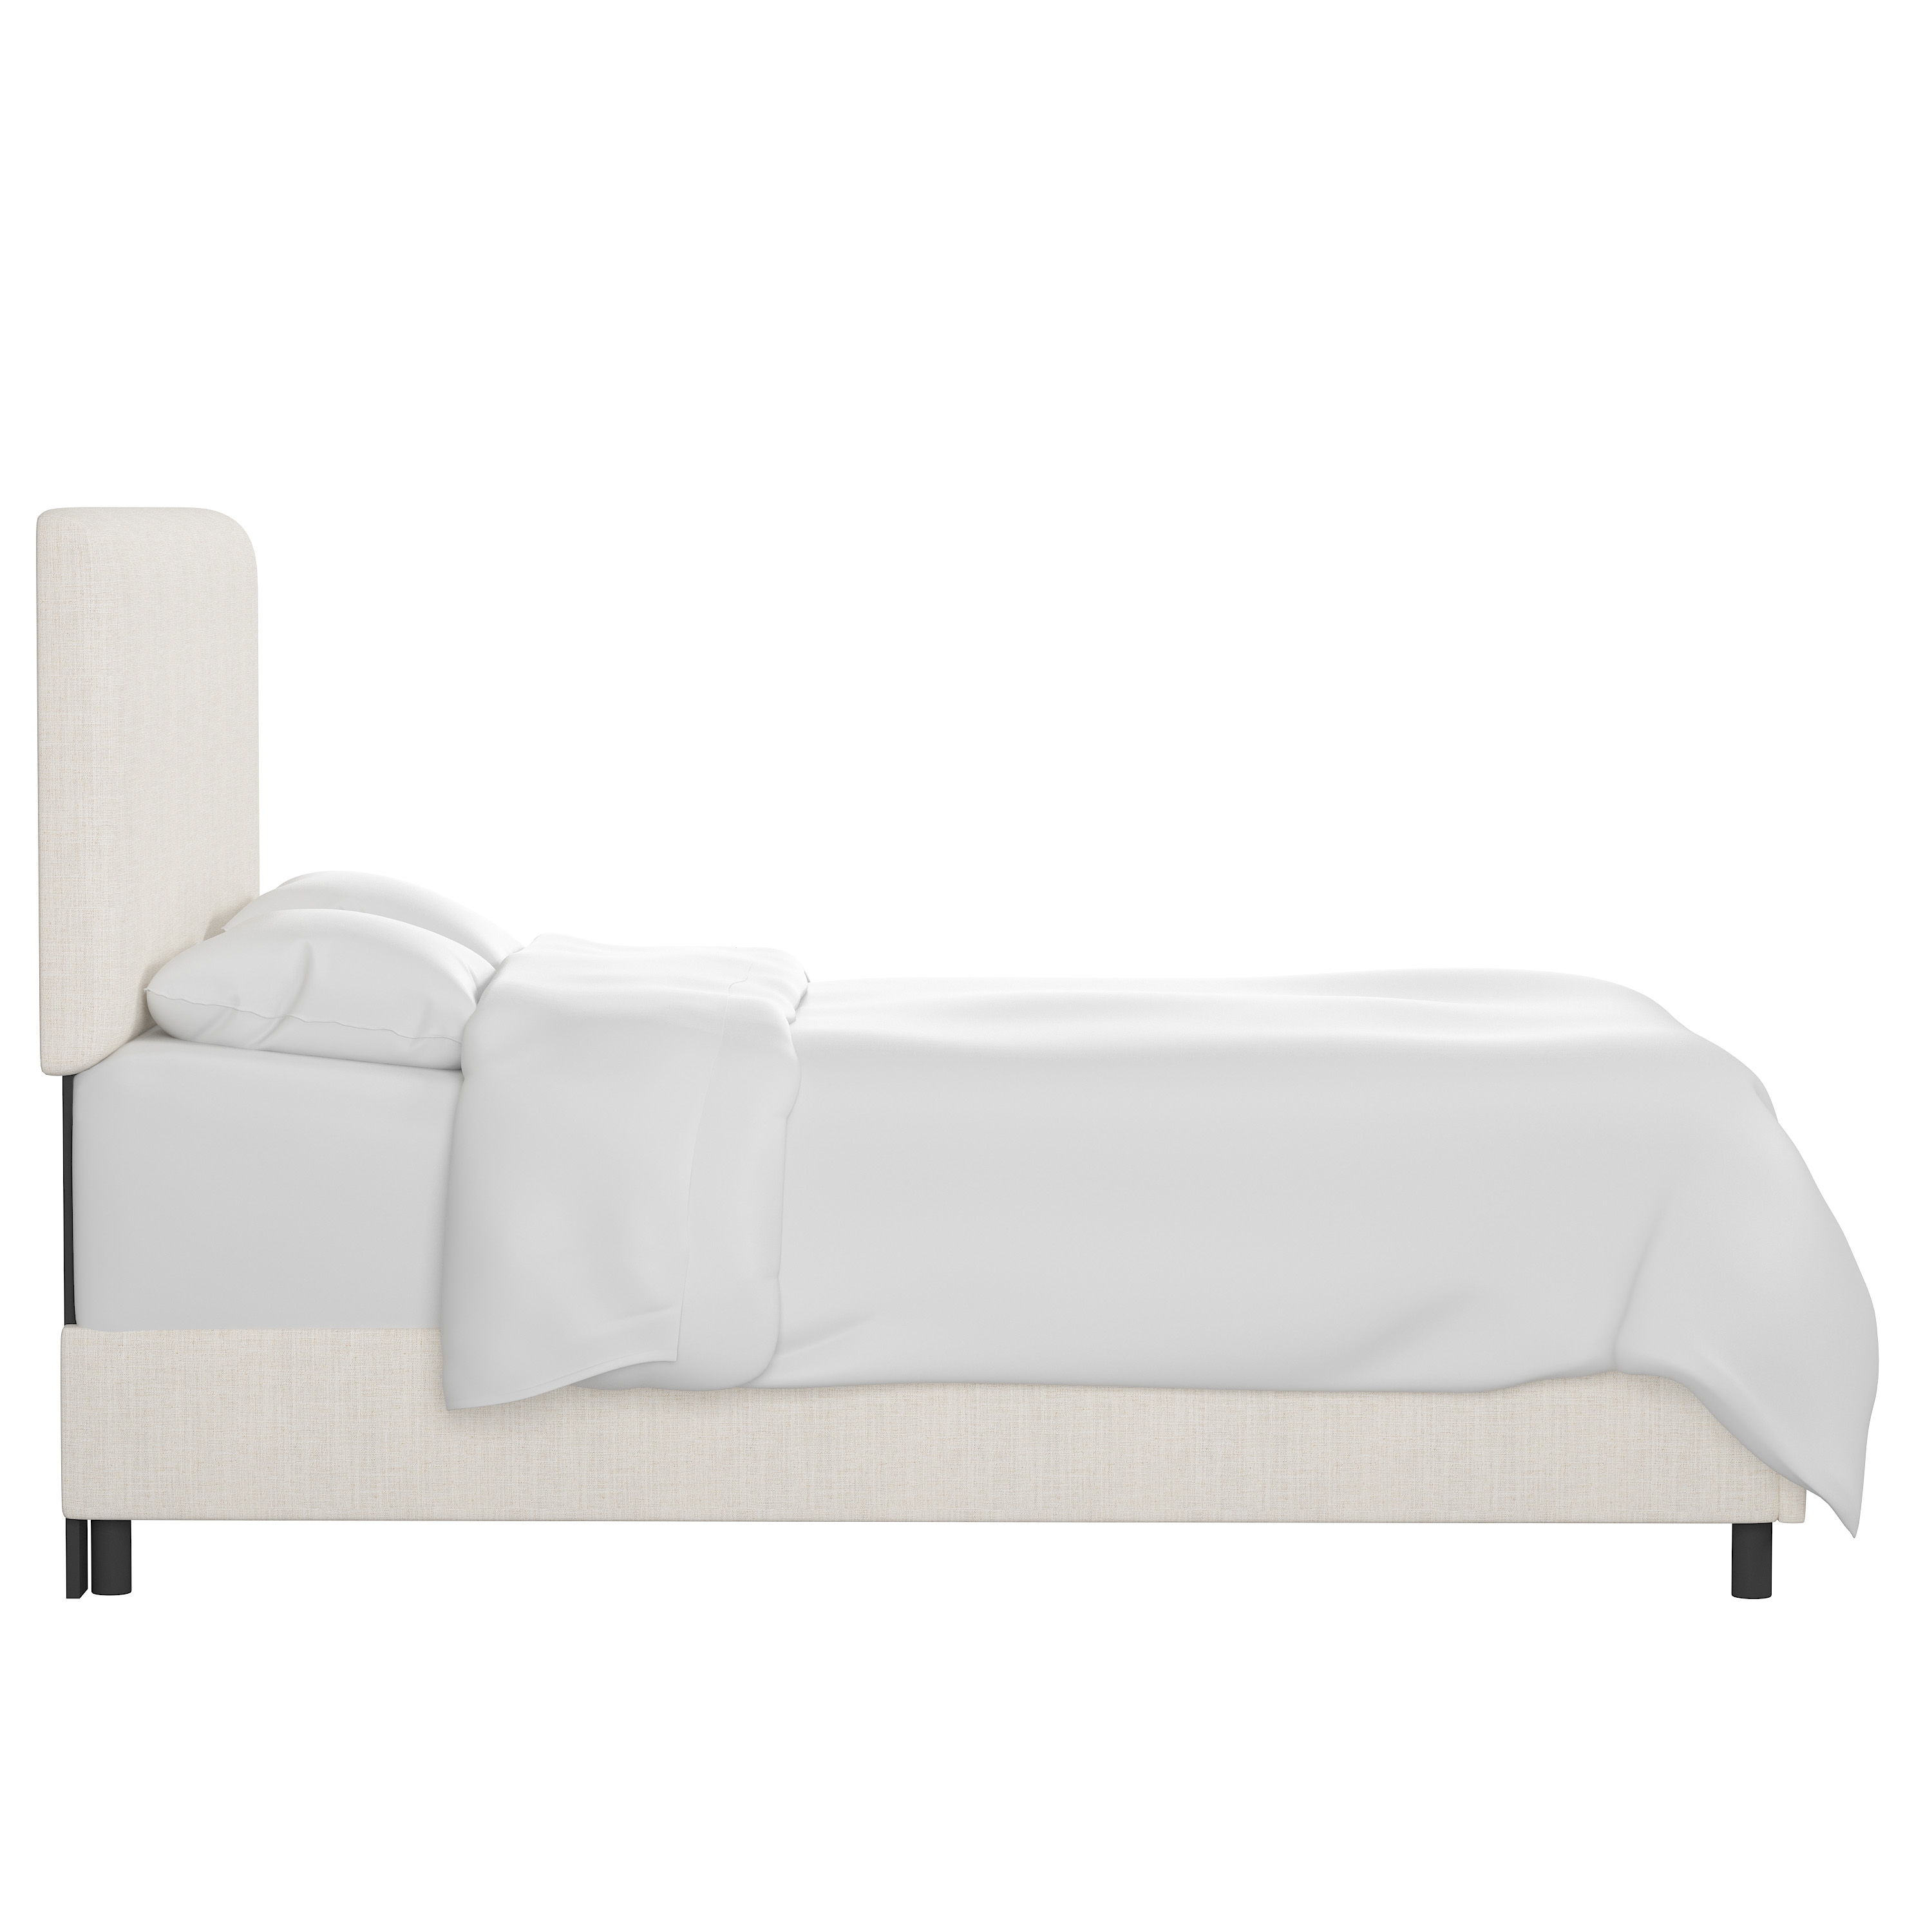 King Sawyer Bed in Linen Talc - Image 3